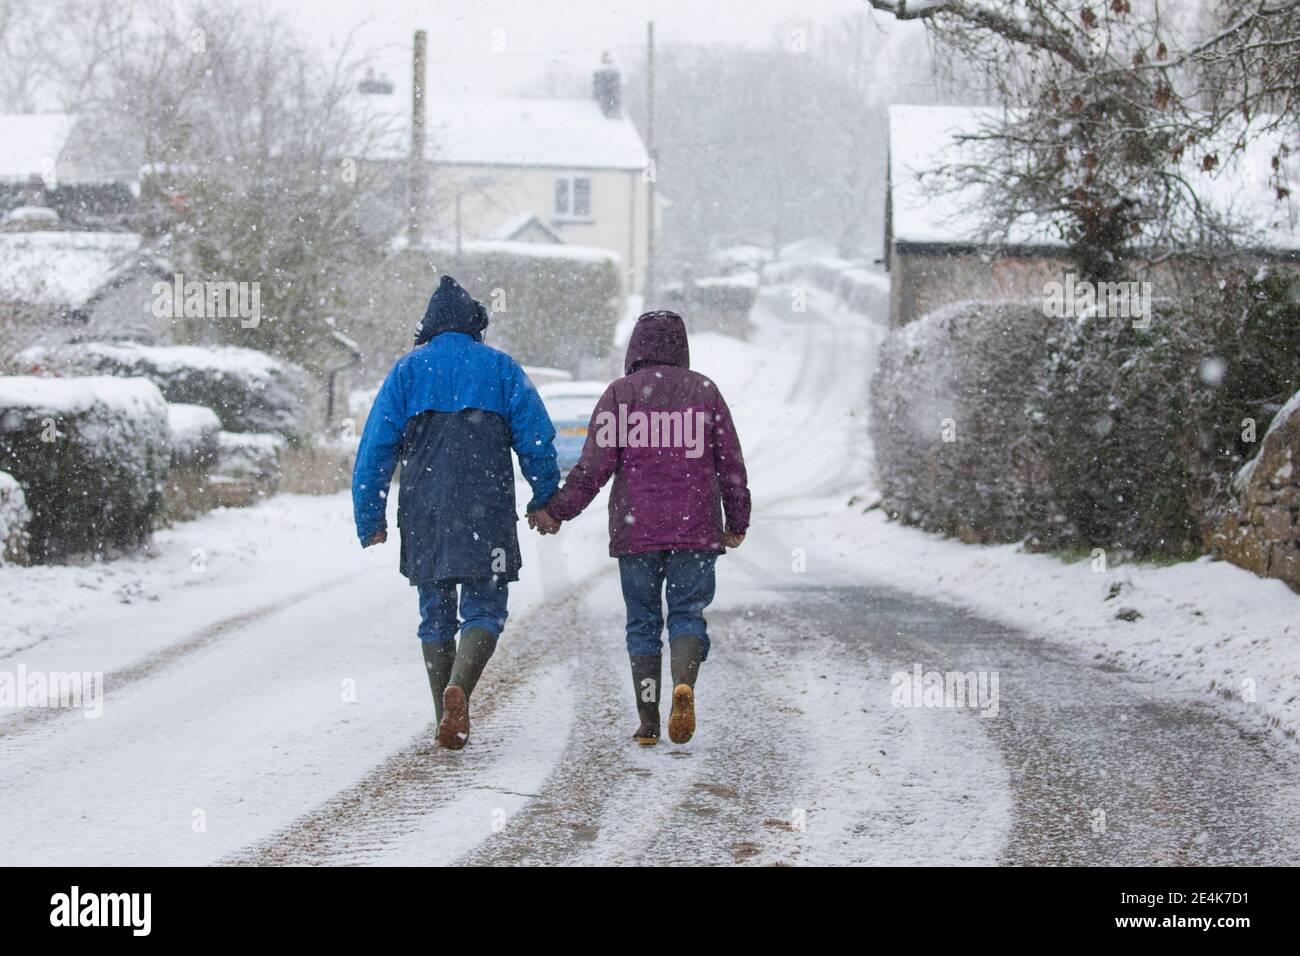 Flintshire, North Wales, UK Wednesday 24th January 2021, UK Weather:  Heavy snowfall in North Wales with a Met Office weather warning in place snow as a weather front tracks eastward across the country. A couple in the village of Lixwm braving the heavy snowfall which is set for the day in the area of Flintshire  © DGDImages/Alamy Live News Stock Photo